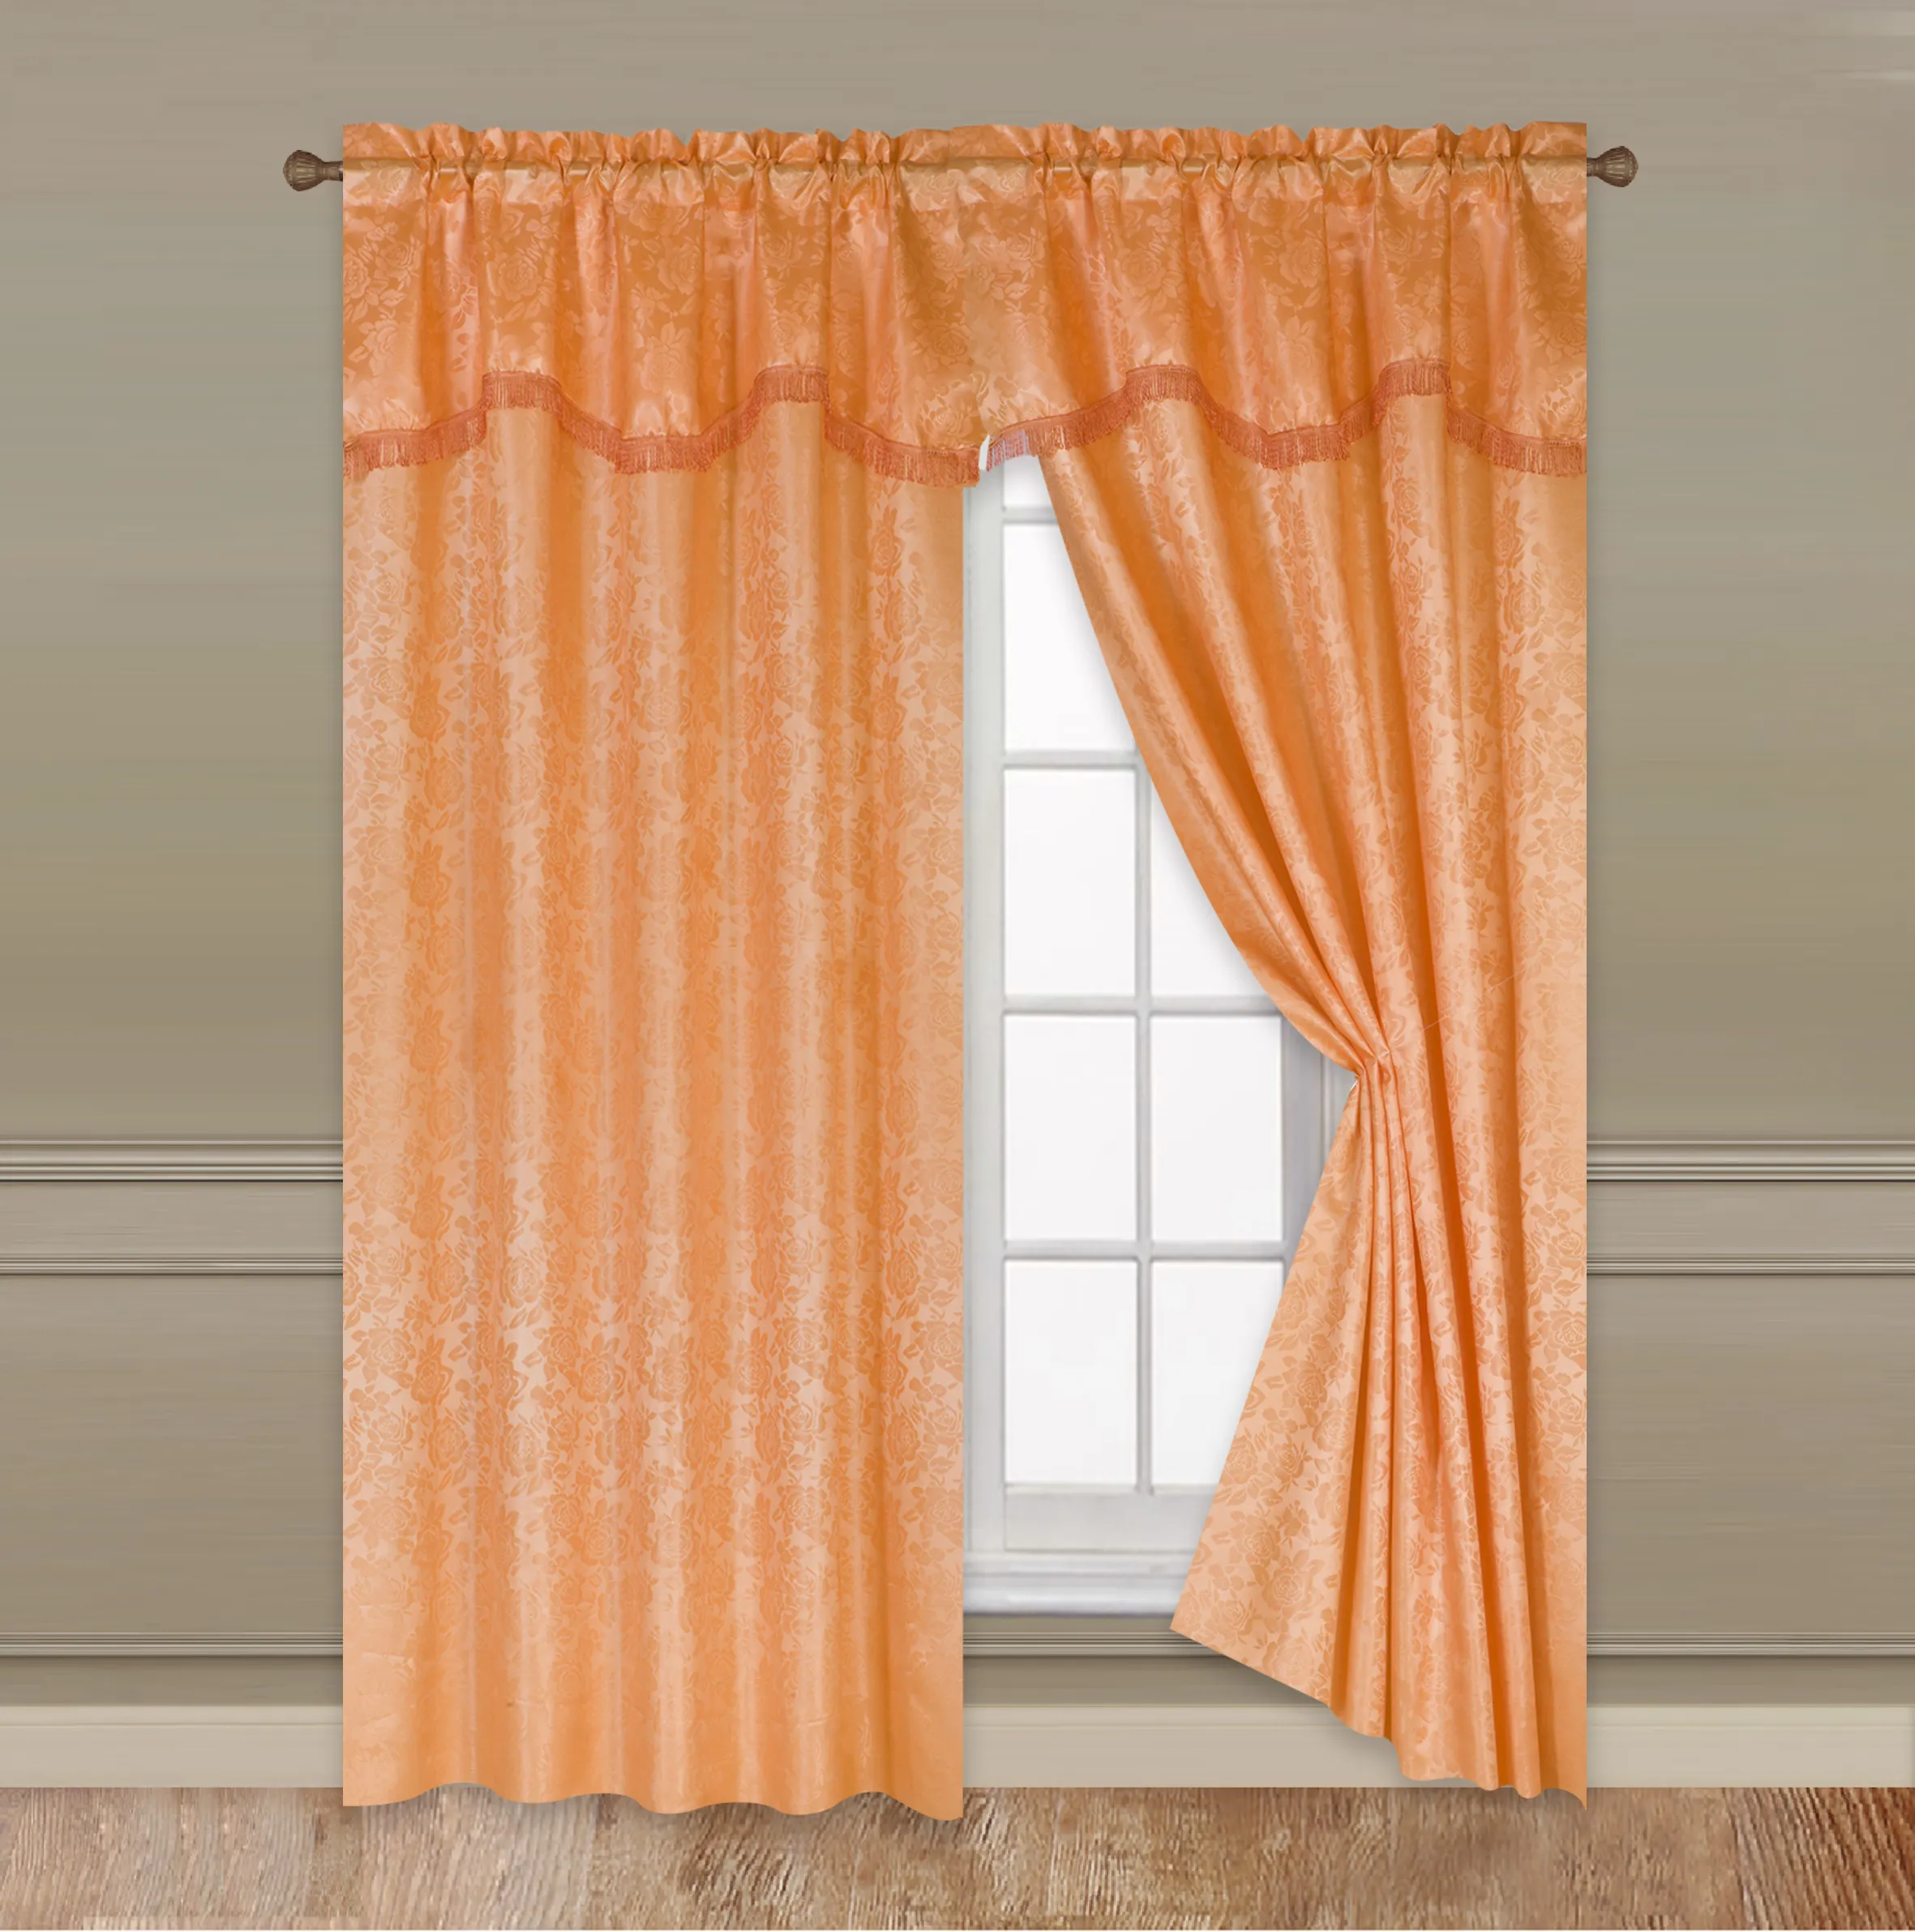 1 pc cathy jacquard curtain with attached valance for the living room ready set curtains